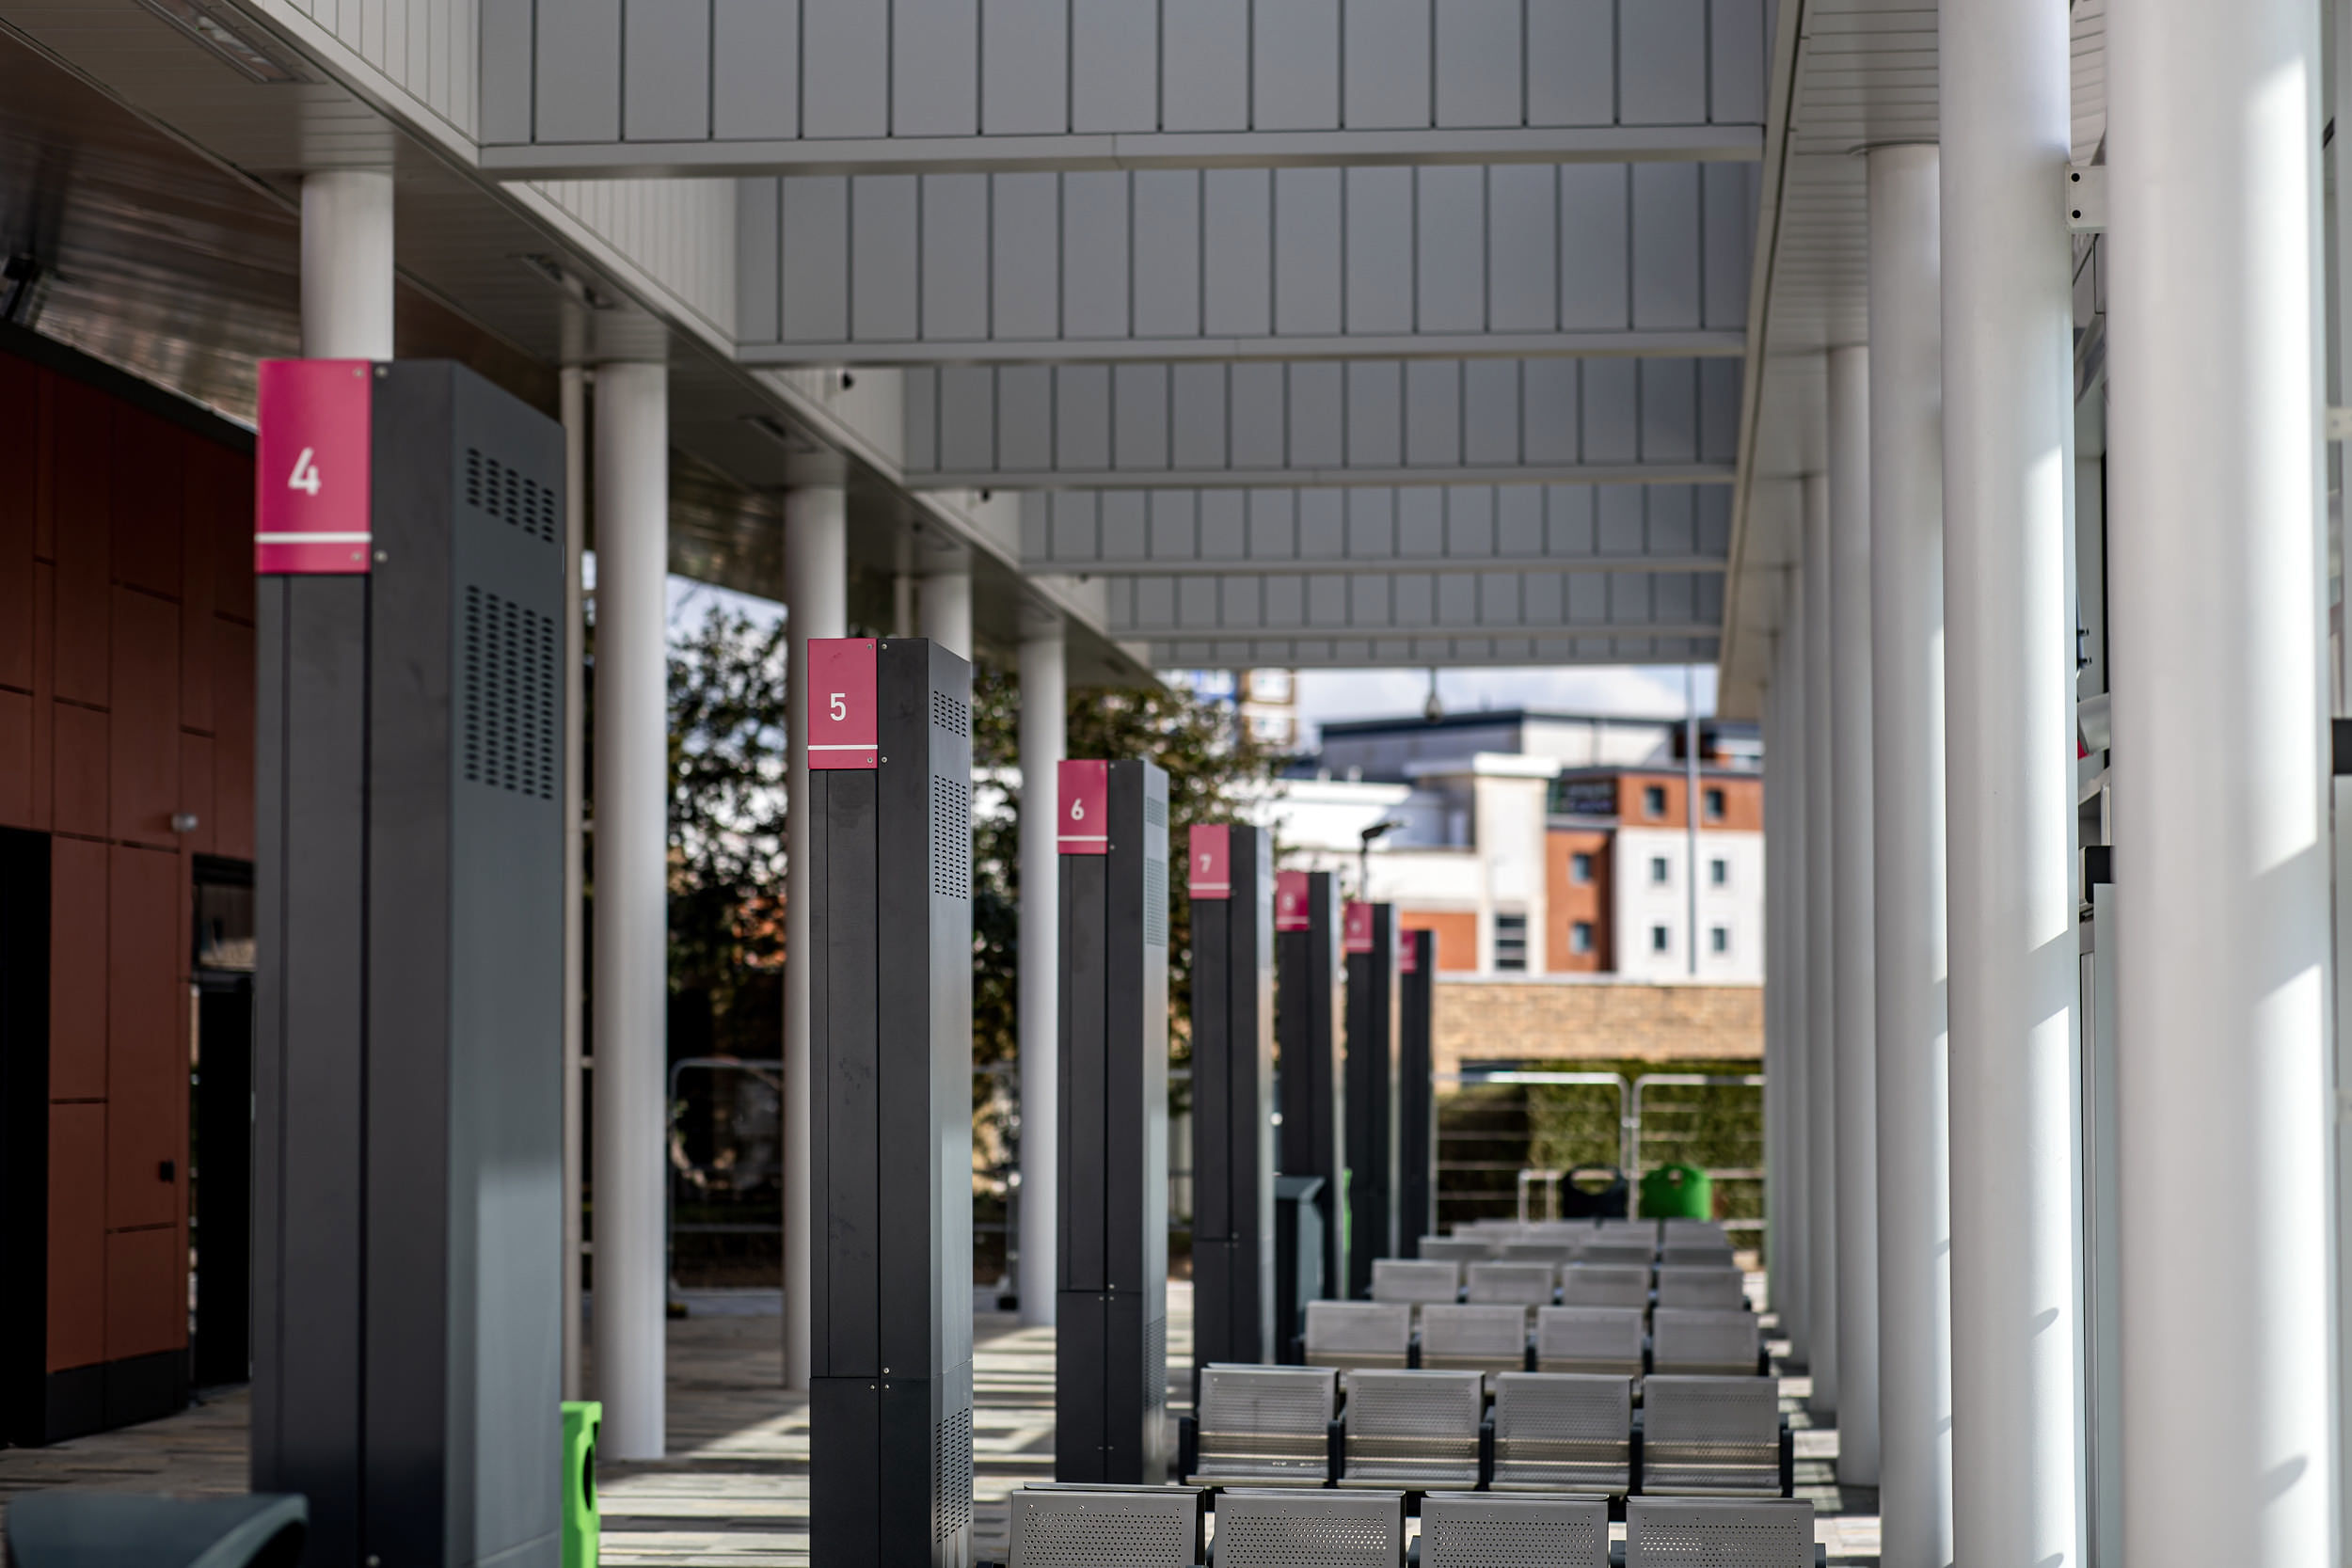 Stevenage’s £9.6 million new bus interchange completed and ready to open later in the Spring